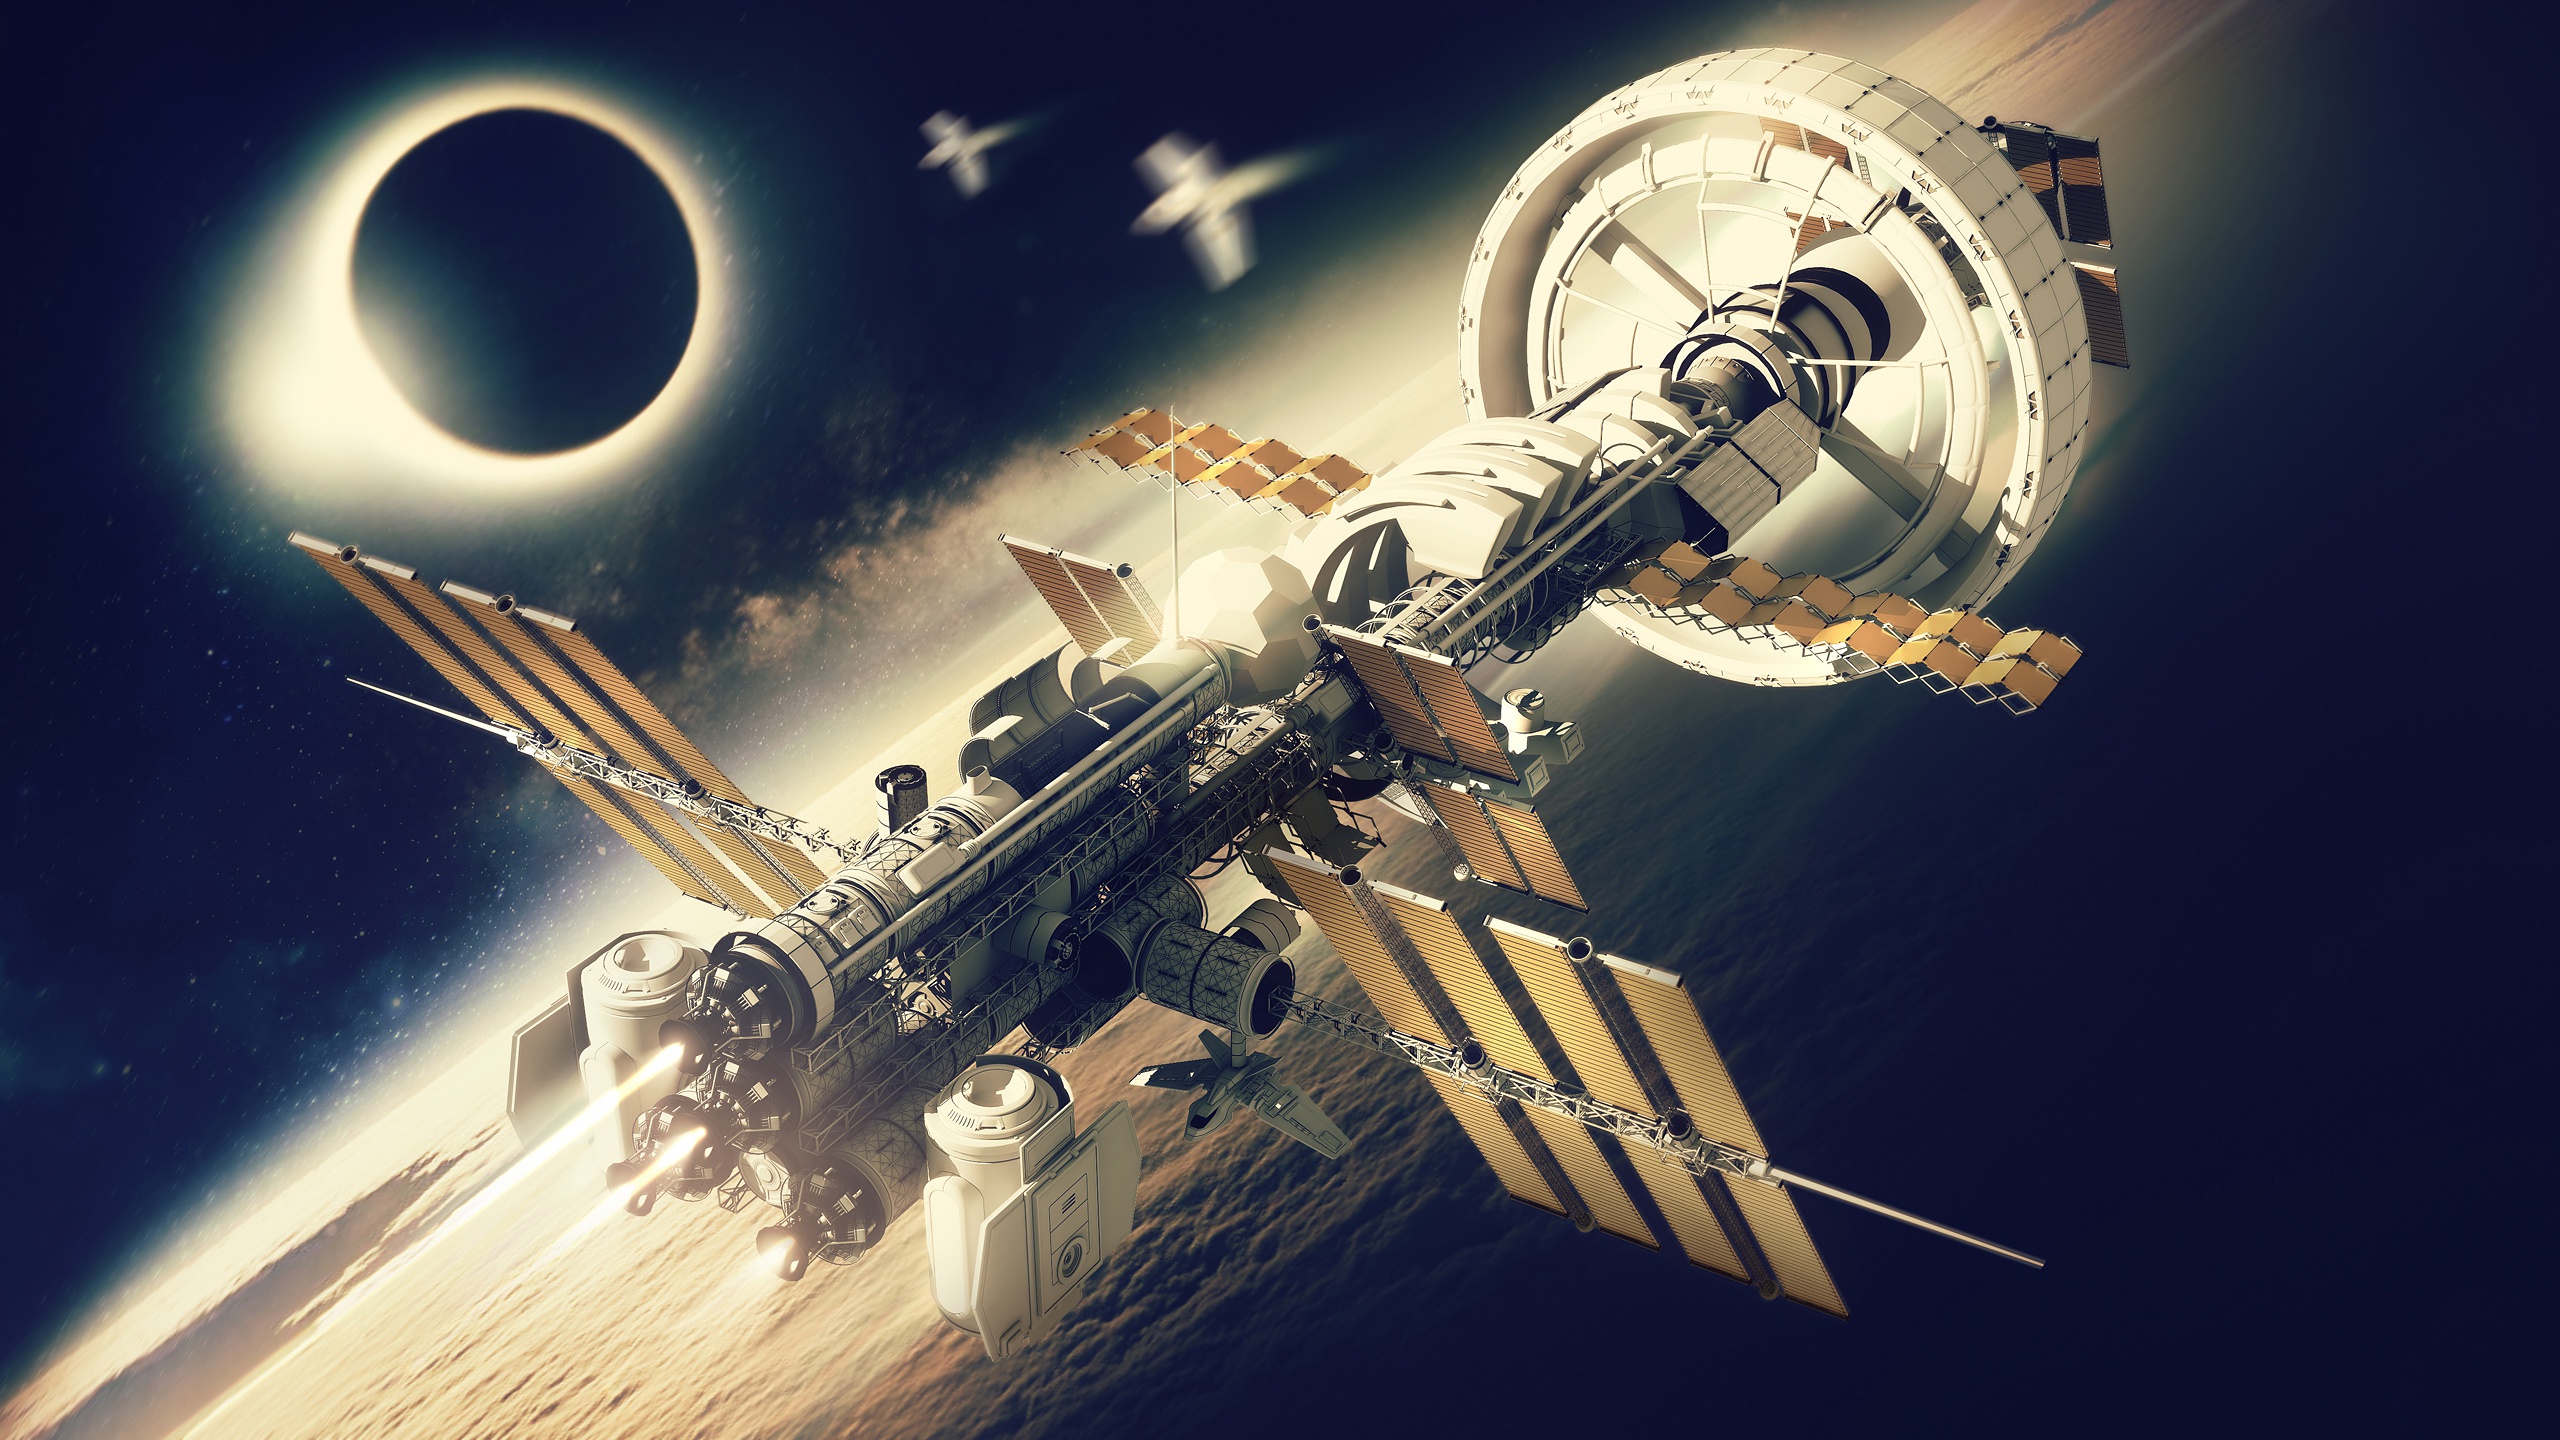 General 2560x1440 space space art science fiction space station digital art SpaceX spaceship